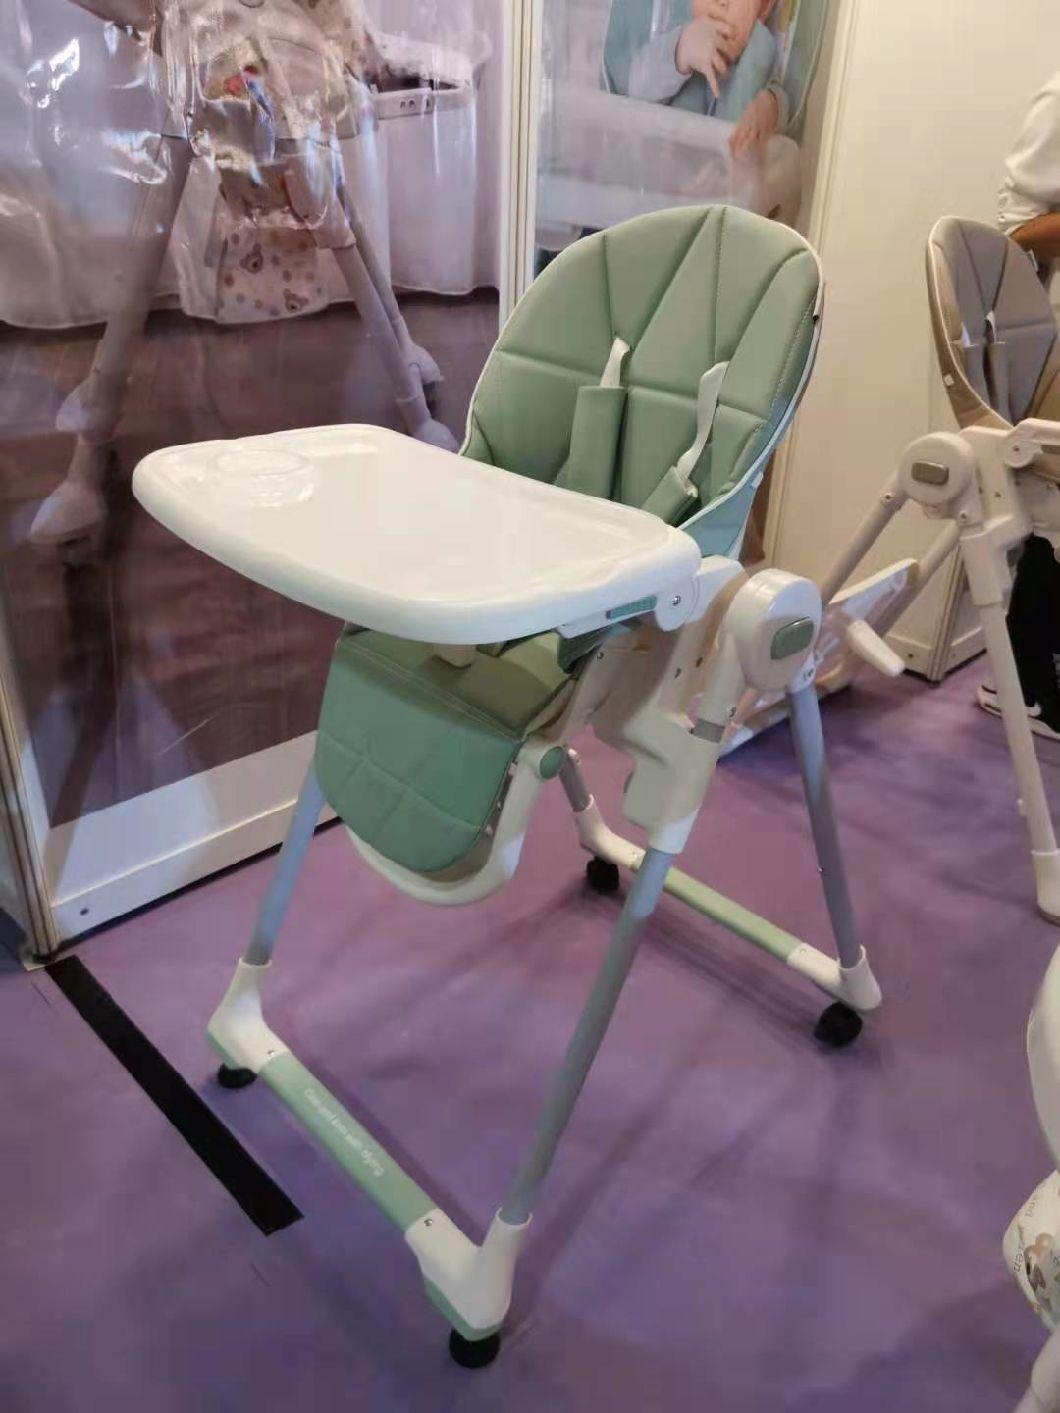 Black Friday Deals High Quality Cheap or Expensive Design Easy to Clean Cover The Best a Baby Doll Next High Chair Price on Floor on Sale in Store Near Me